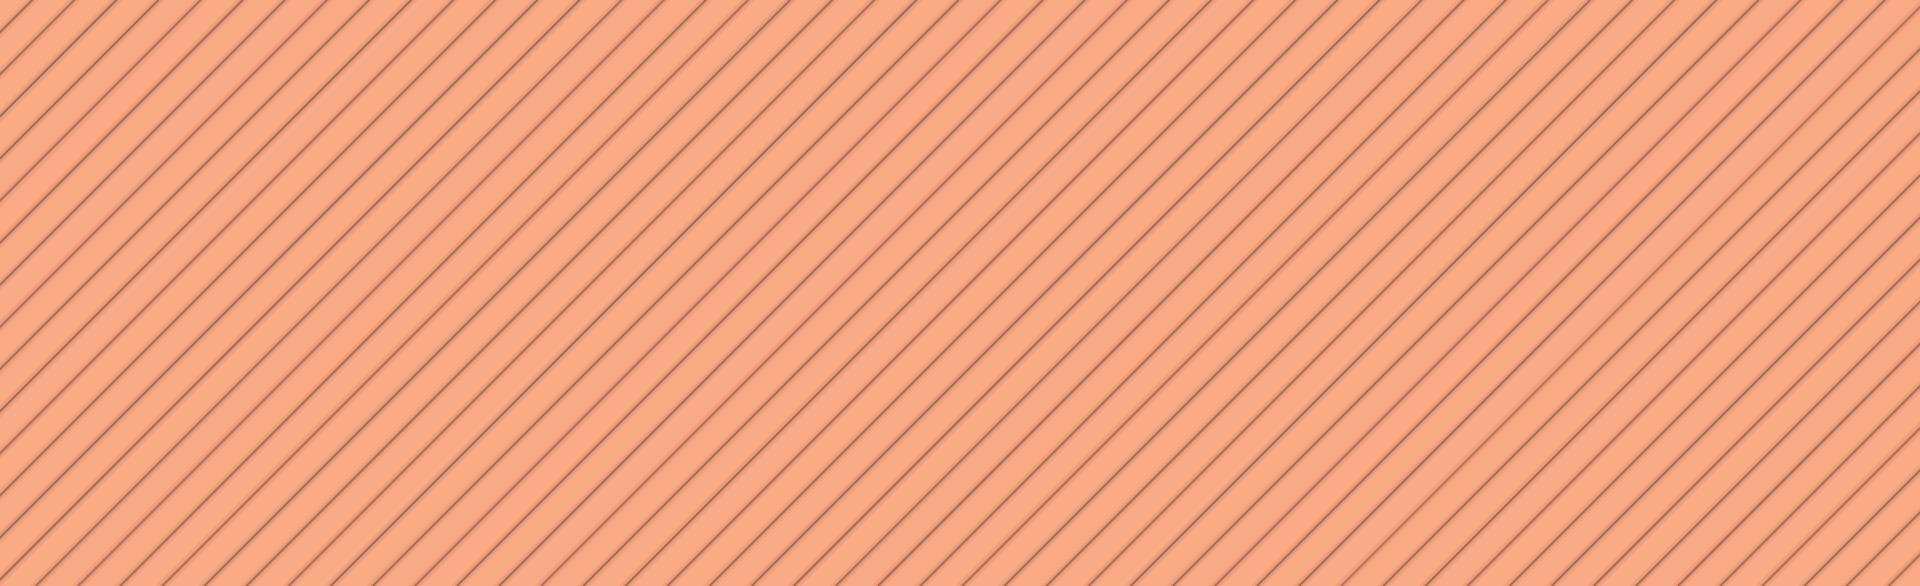 Panoramic abstract light texture background slanted lines - Vector